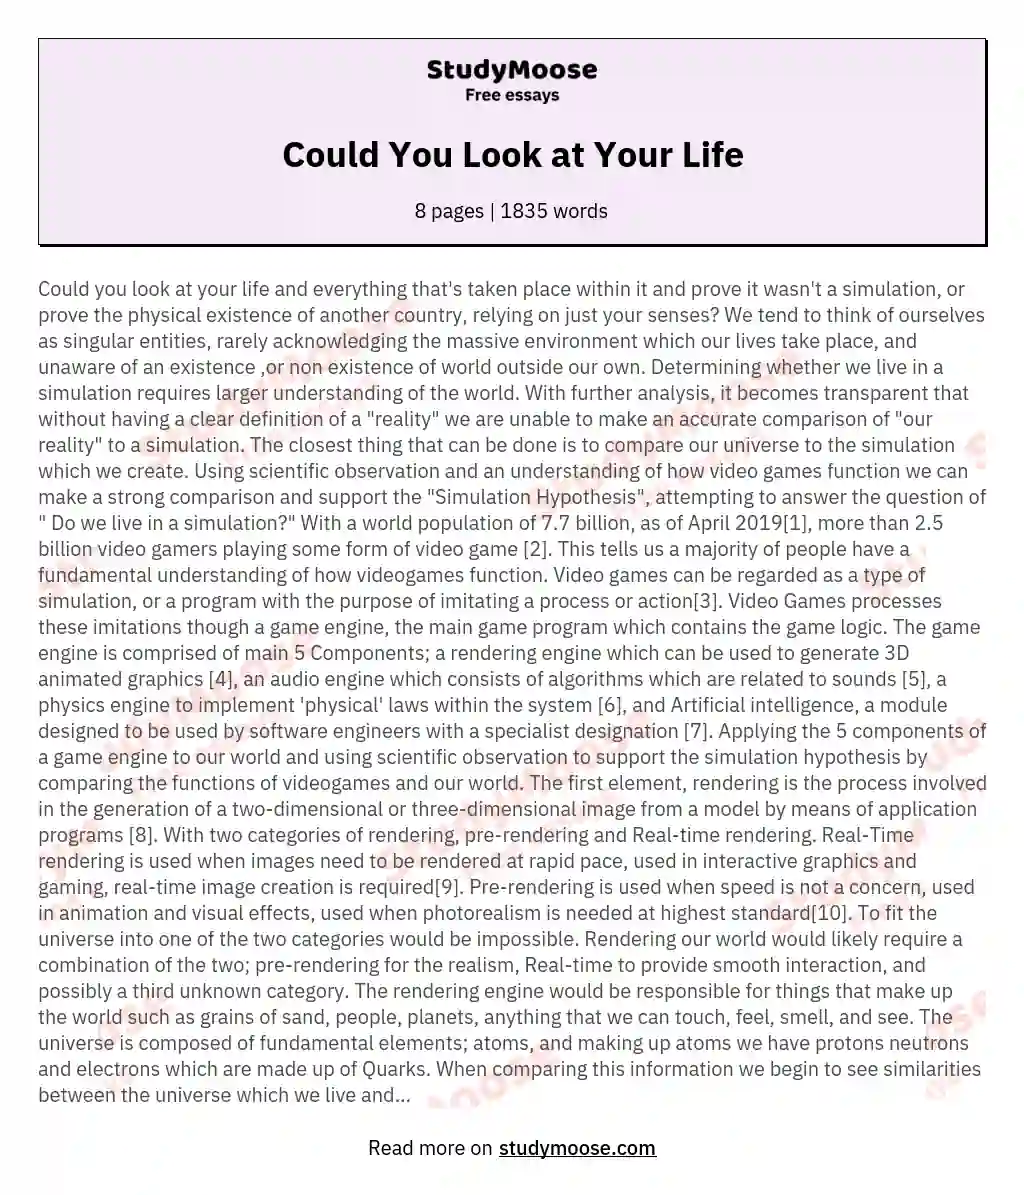 Could You Look at Your Life essay